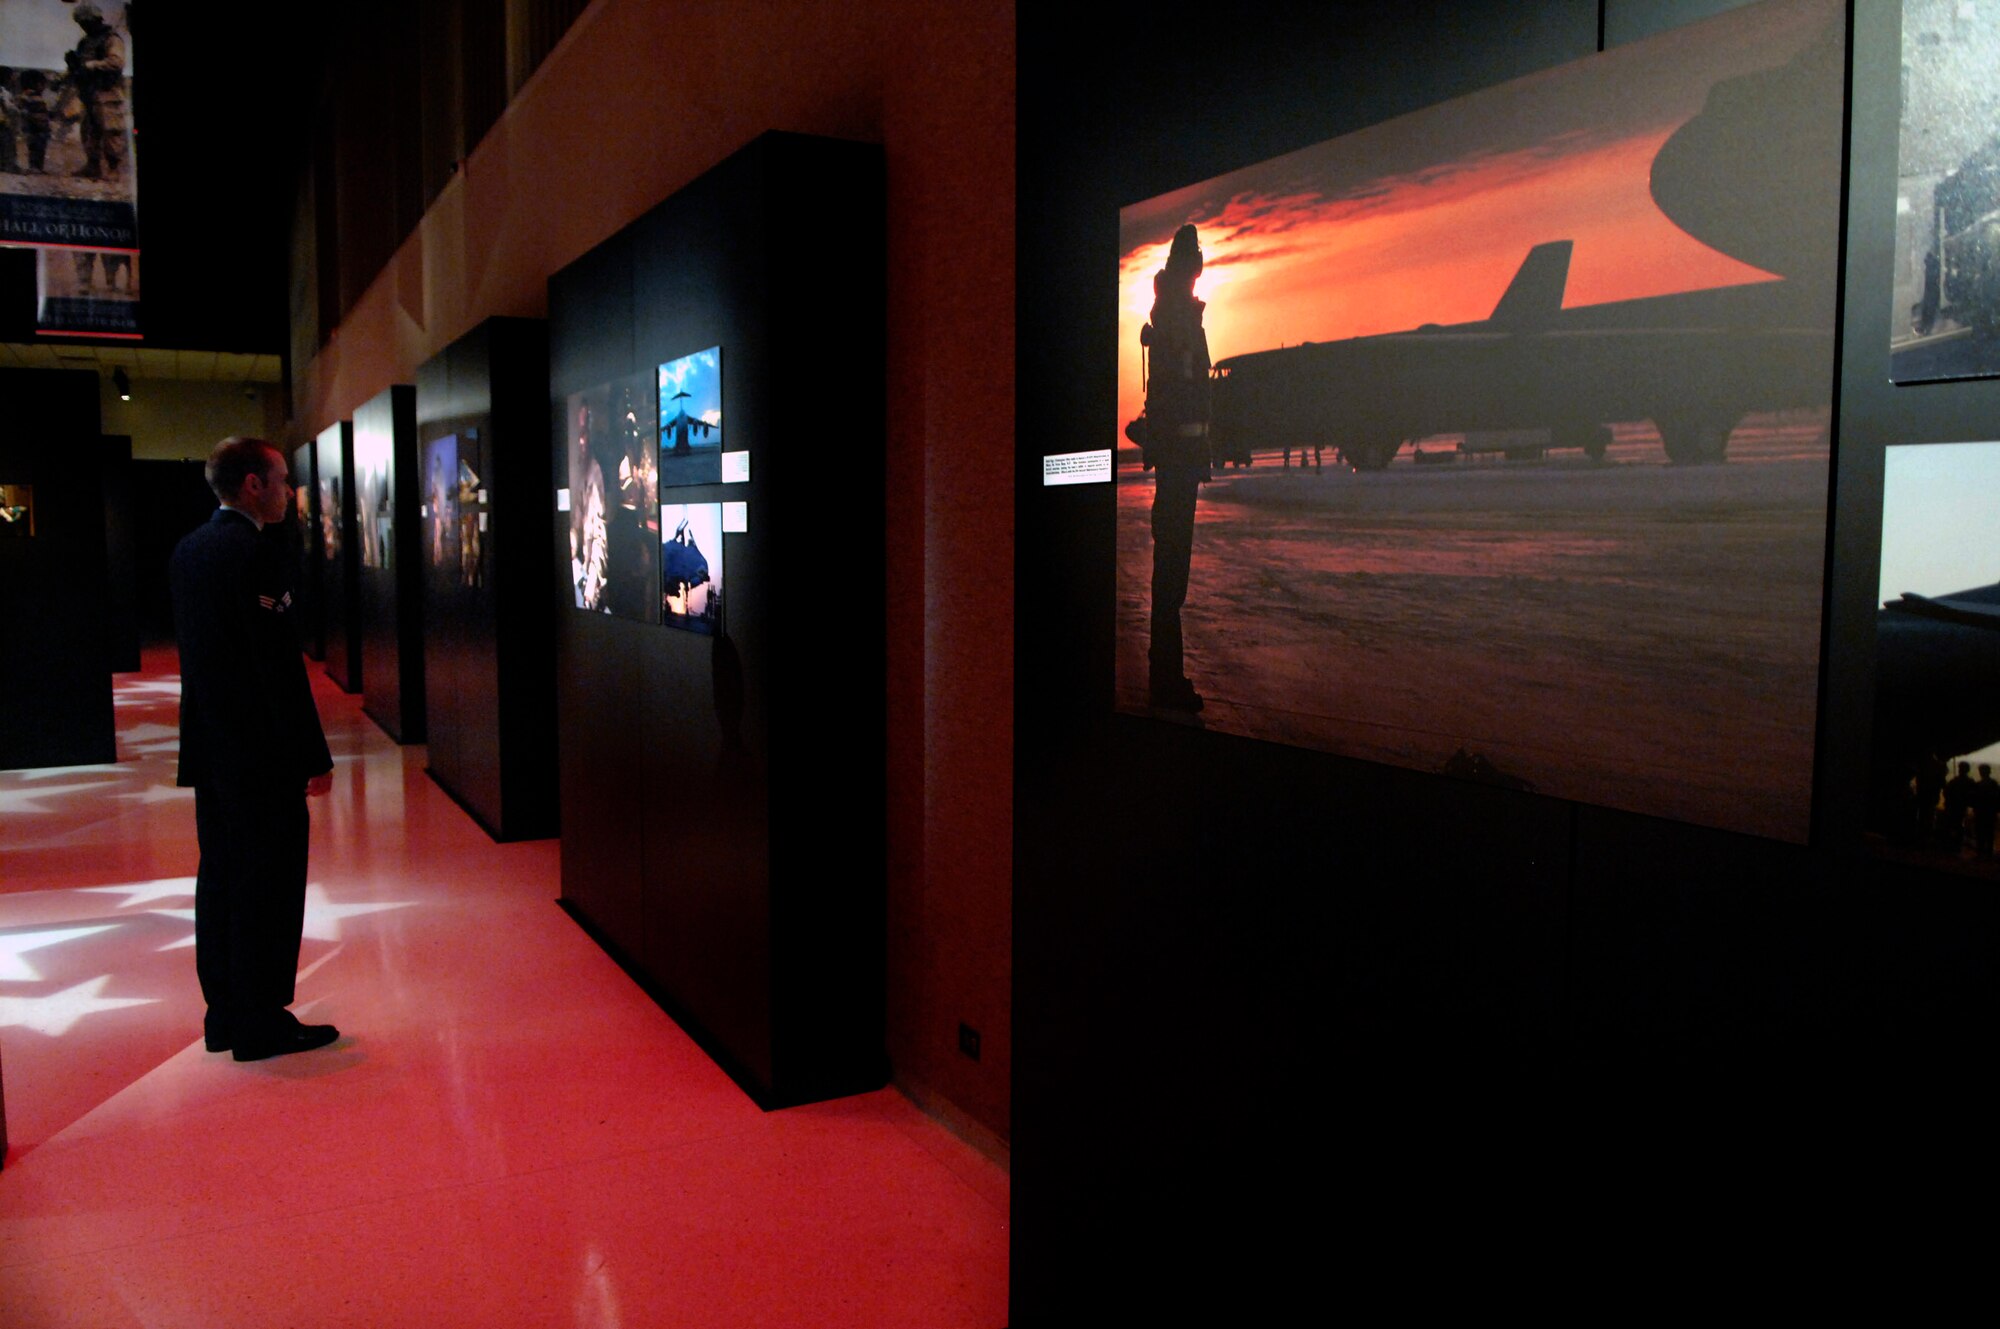 Senior Airman Chad Kellum takes a moment to check out Air Force photographs displayed in the "On the Other Side of the Lens" exhibit at the National Museum of the U.S. Air Force on Wright-Patterson Air Force Base, Ohio. Airman Kellum is one of the more than 30 Air Force photographers featured in the exhibit. The exhbit will run through December. (U.S. Air Force photo/Tech.Sgt. Cecilio Ricardo)